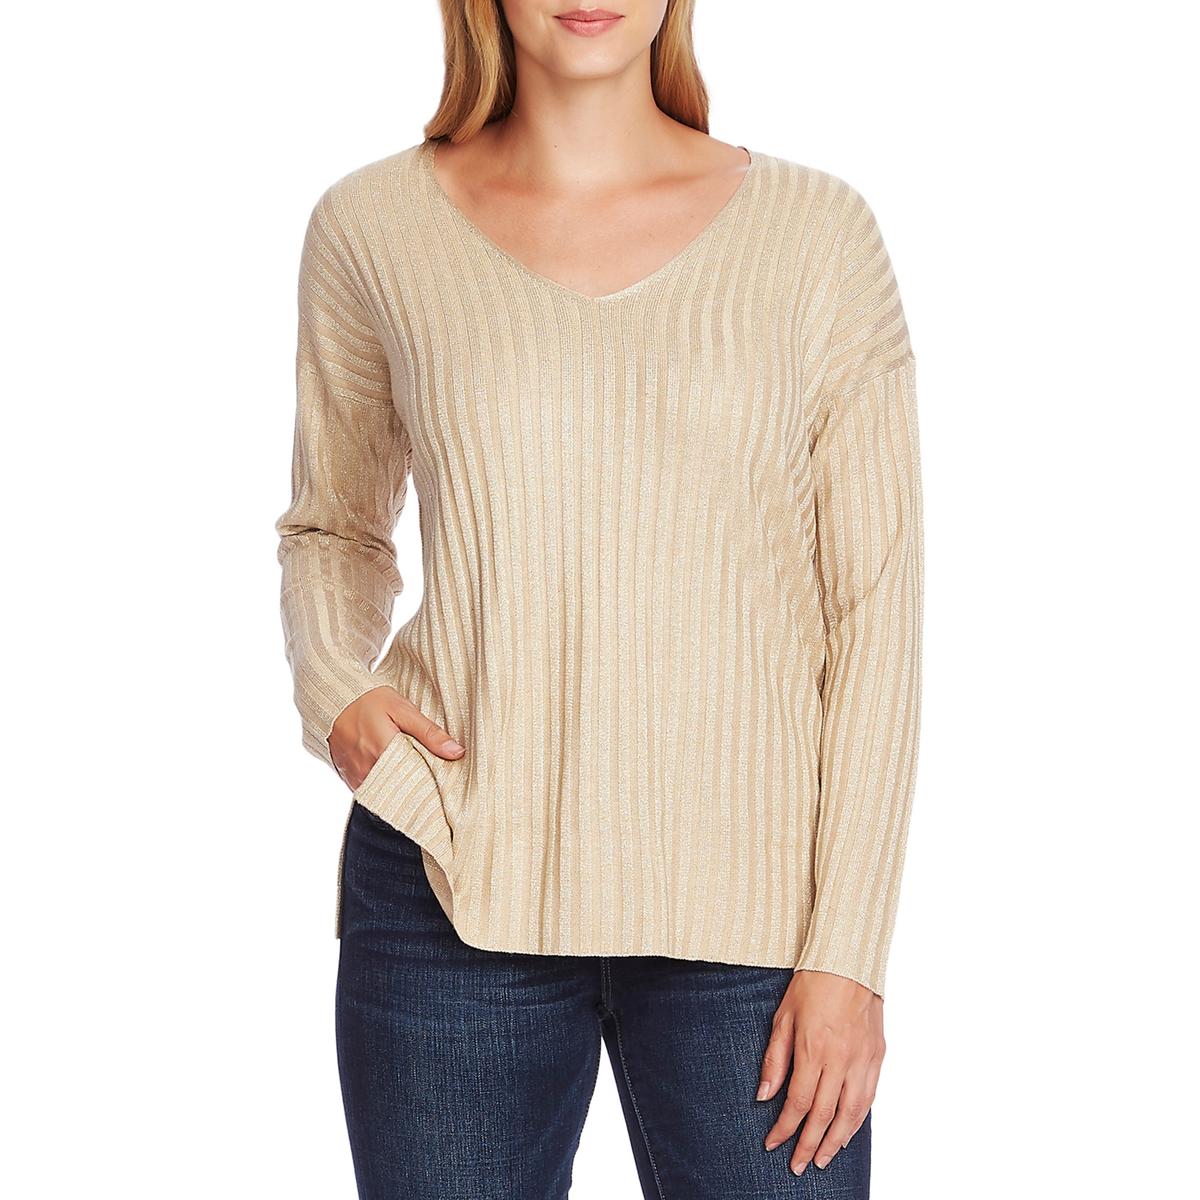 Vince Camuto Womens Ribbed Metallic Sweater